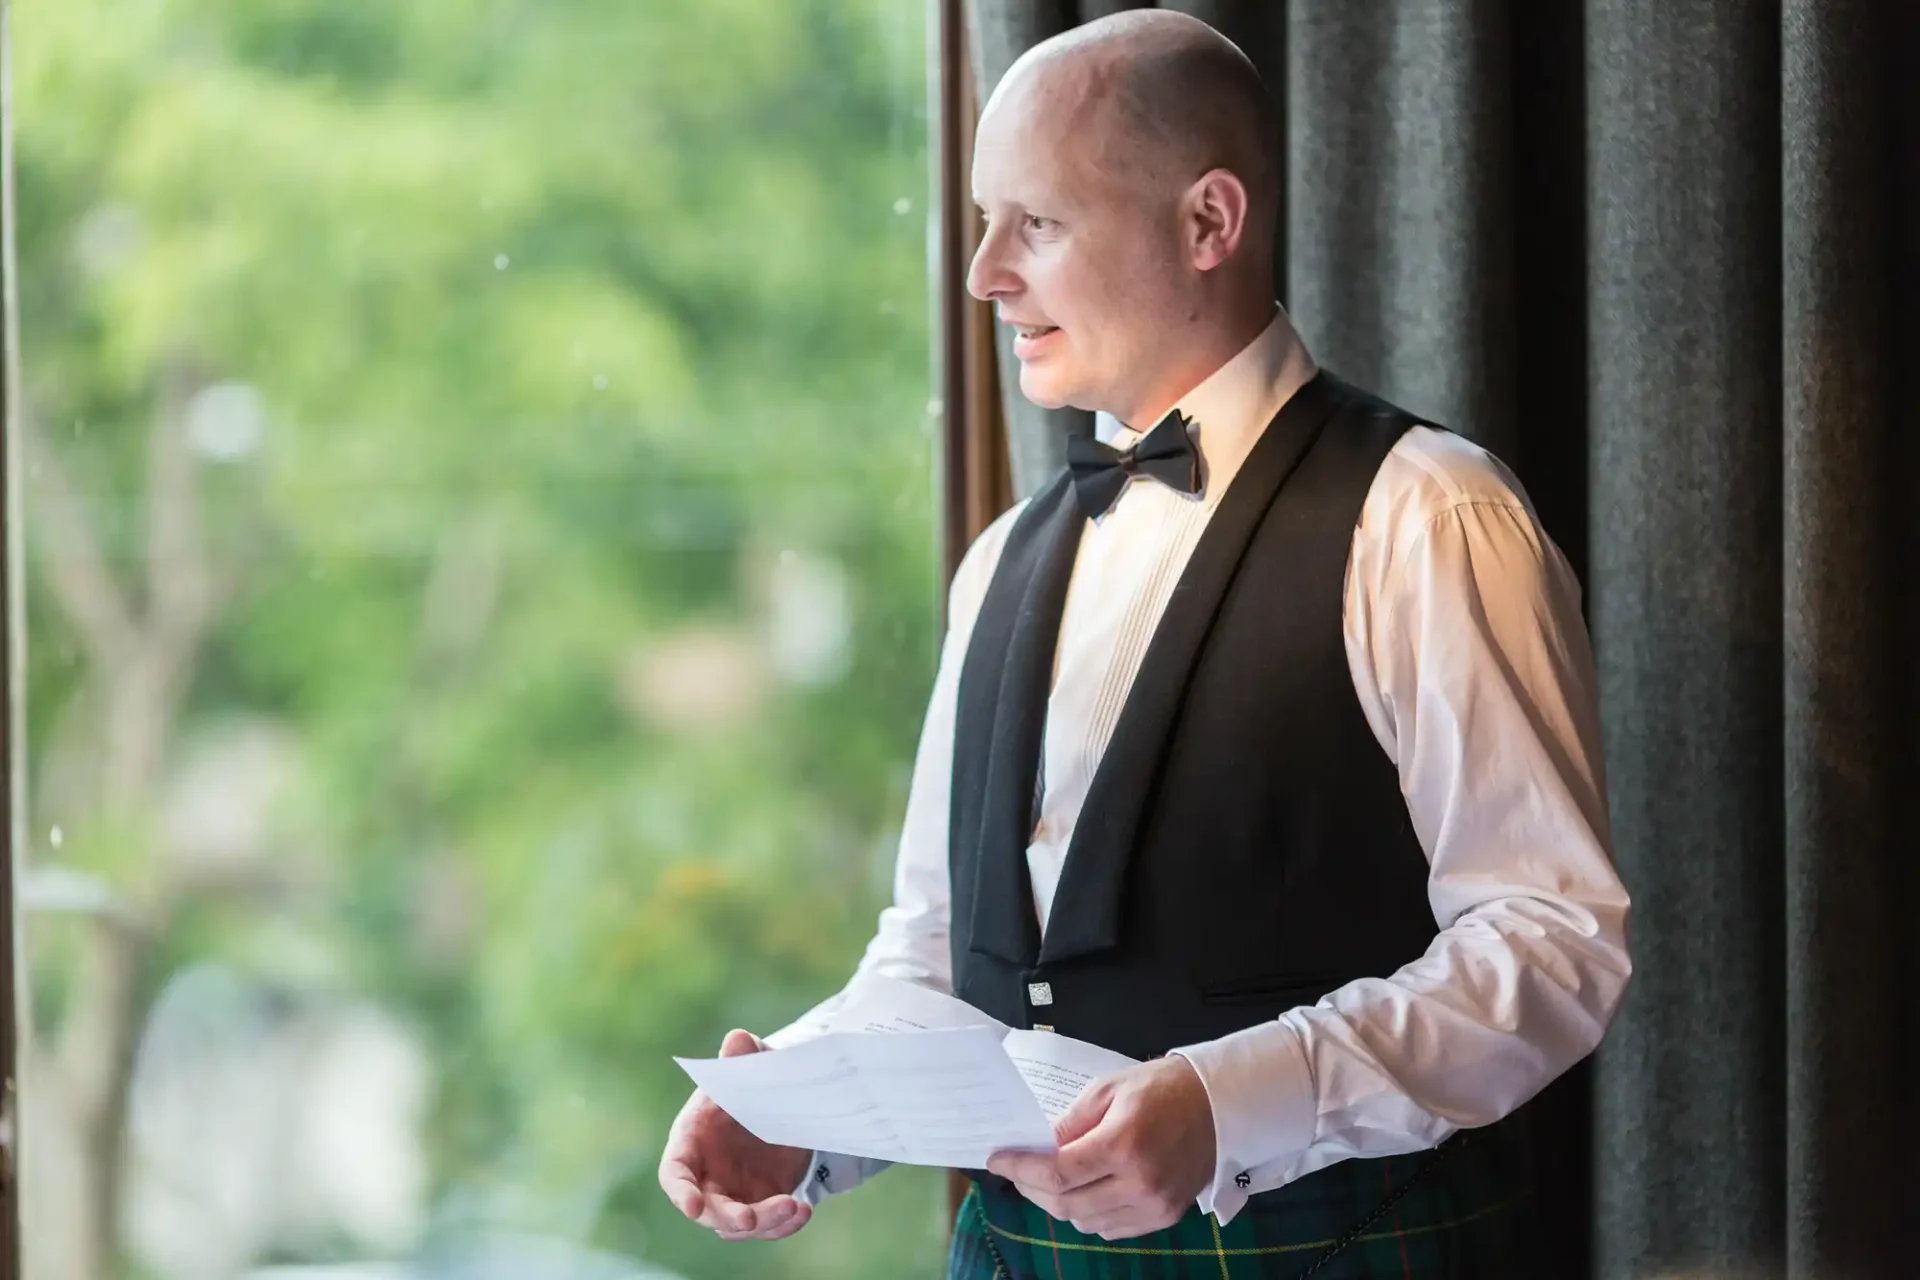 A bald man in a kilt and formal vest, holding papers and looking out a window.